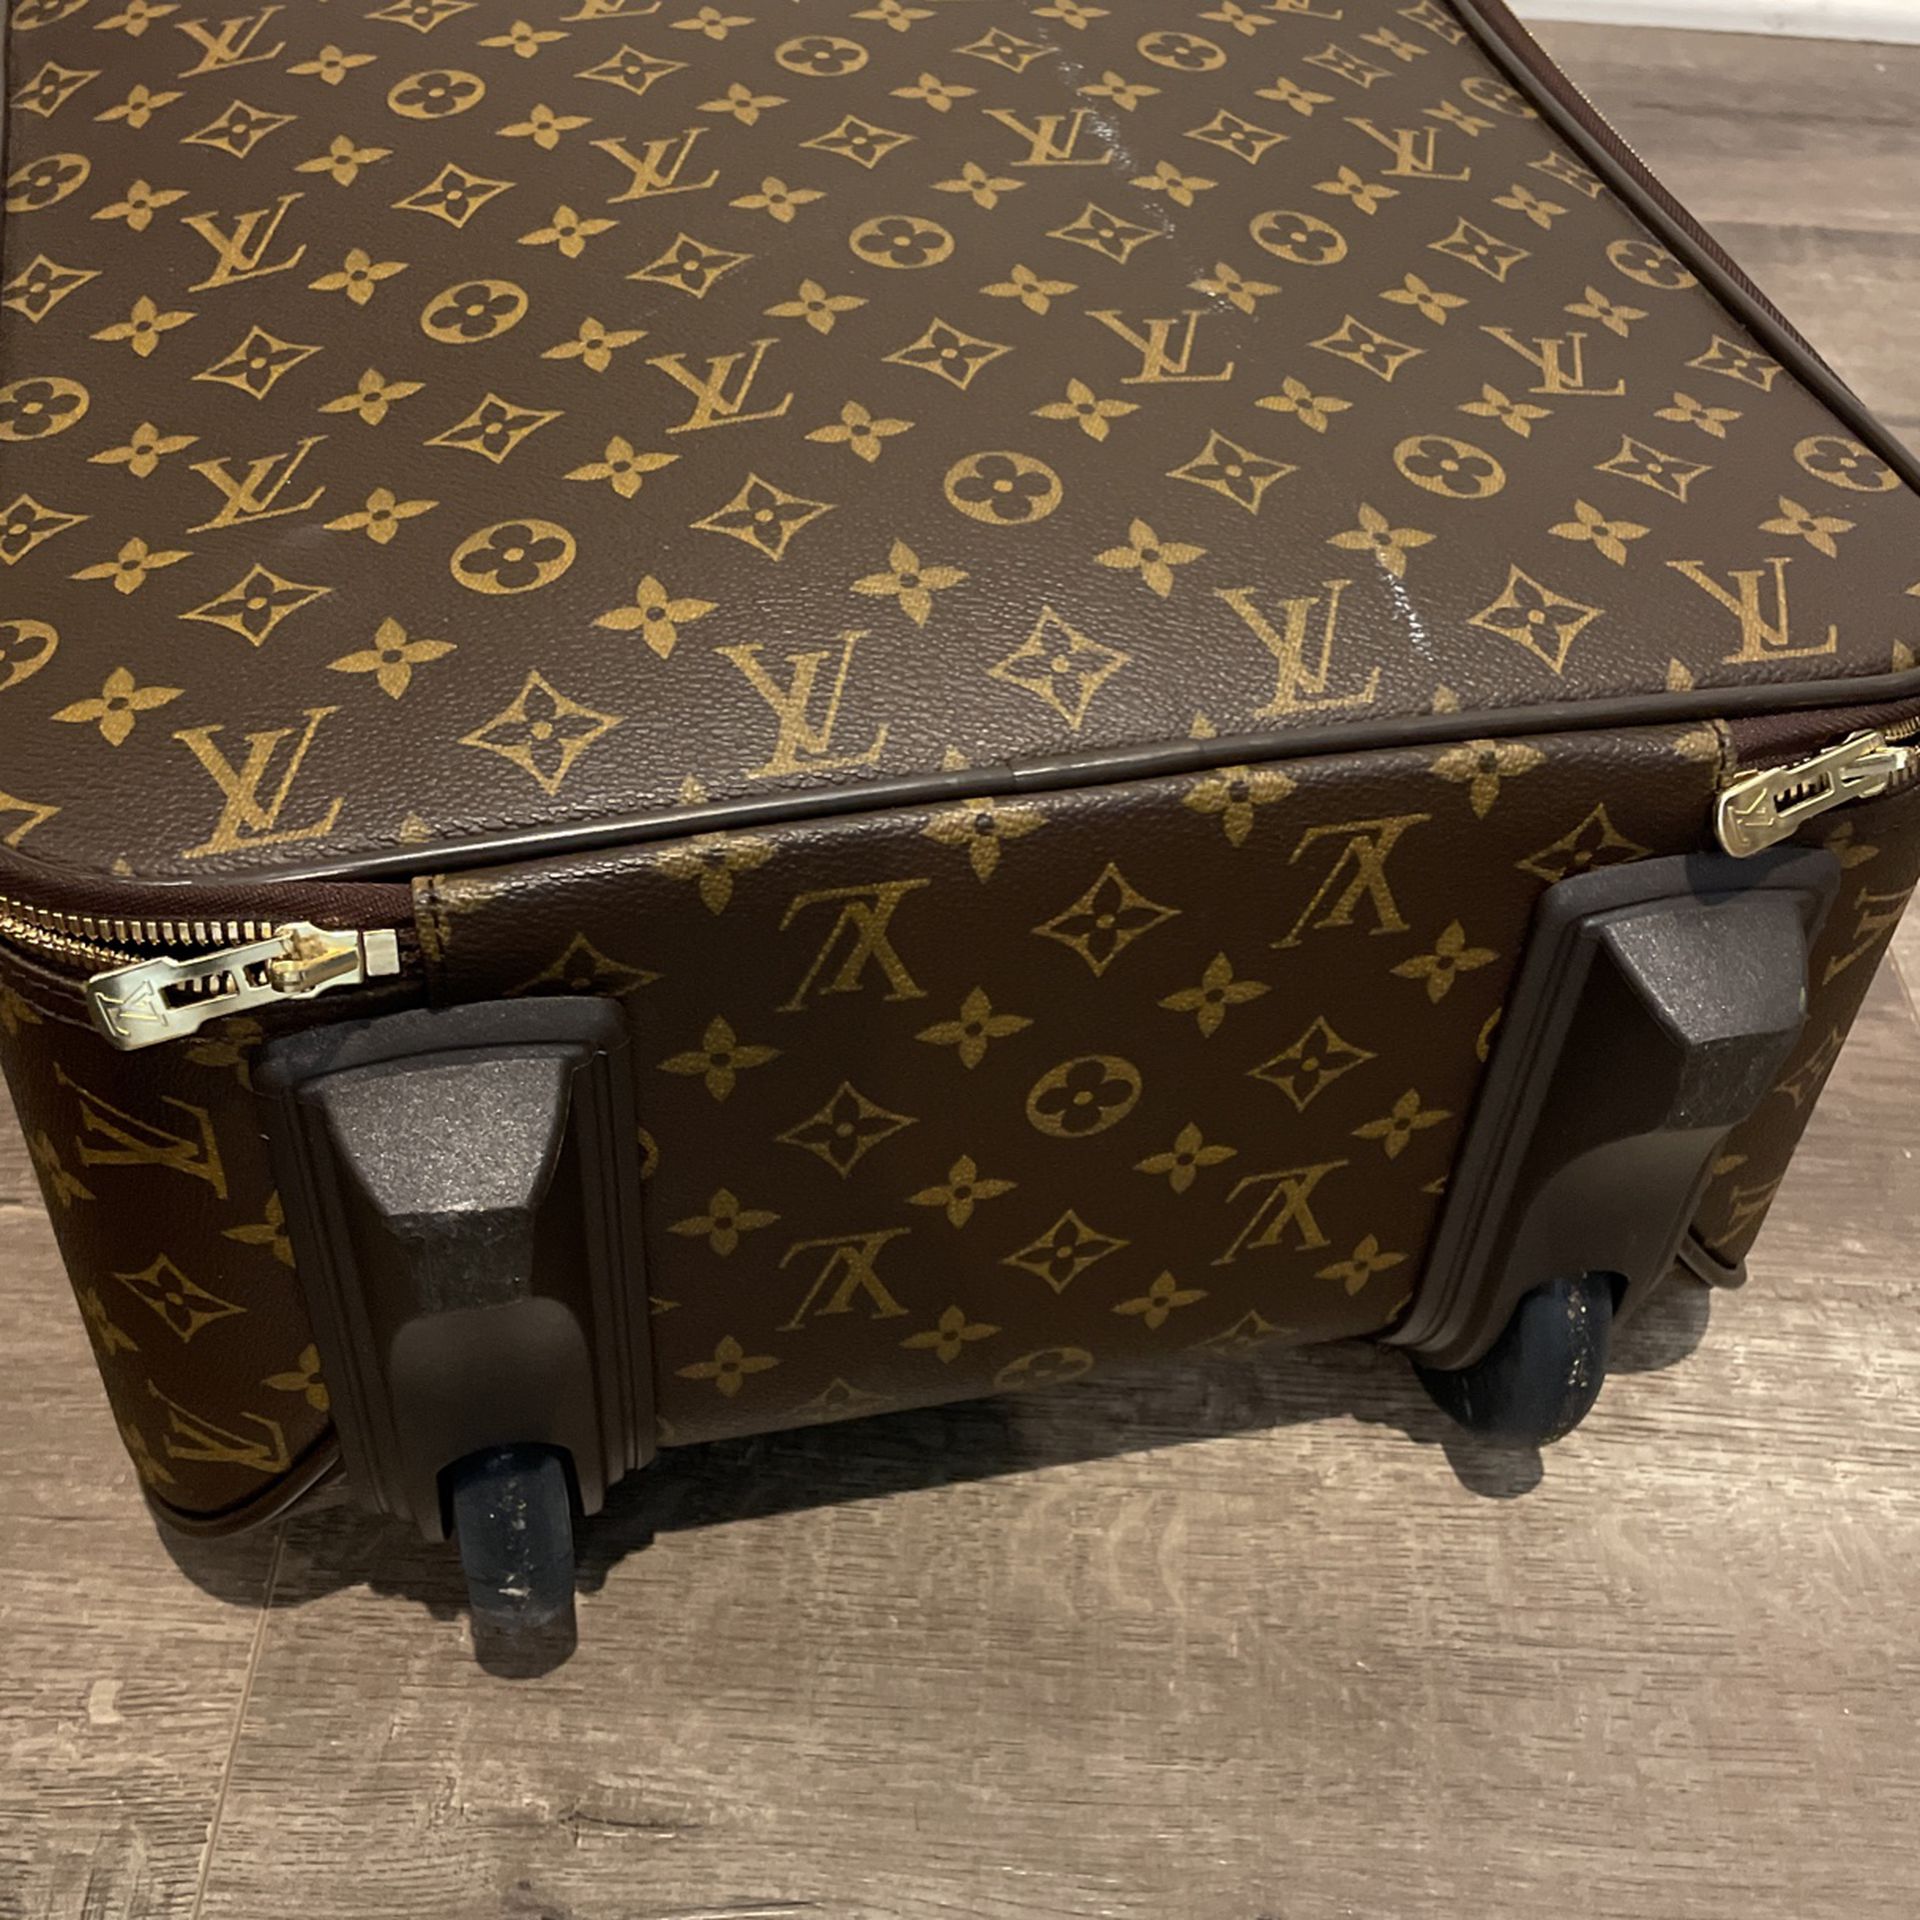 Louis Vuitton Luggage Tag/strap Holder Sets for Sale in San Antonio, TX -  OfferUp